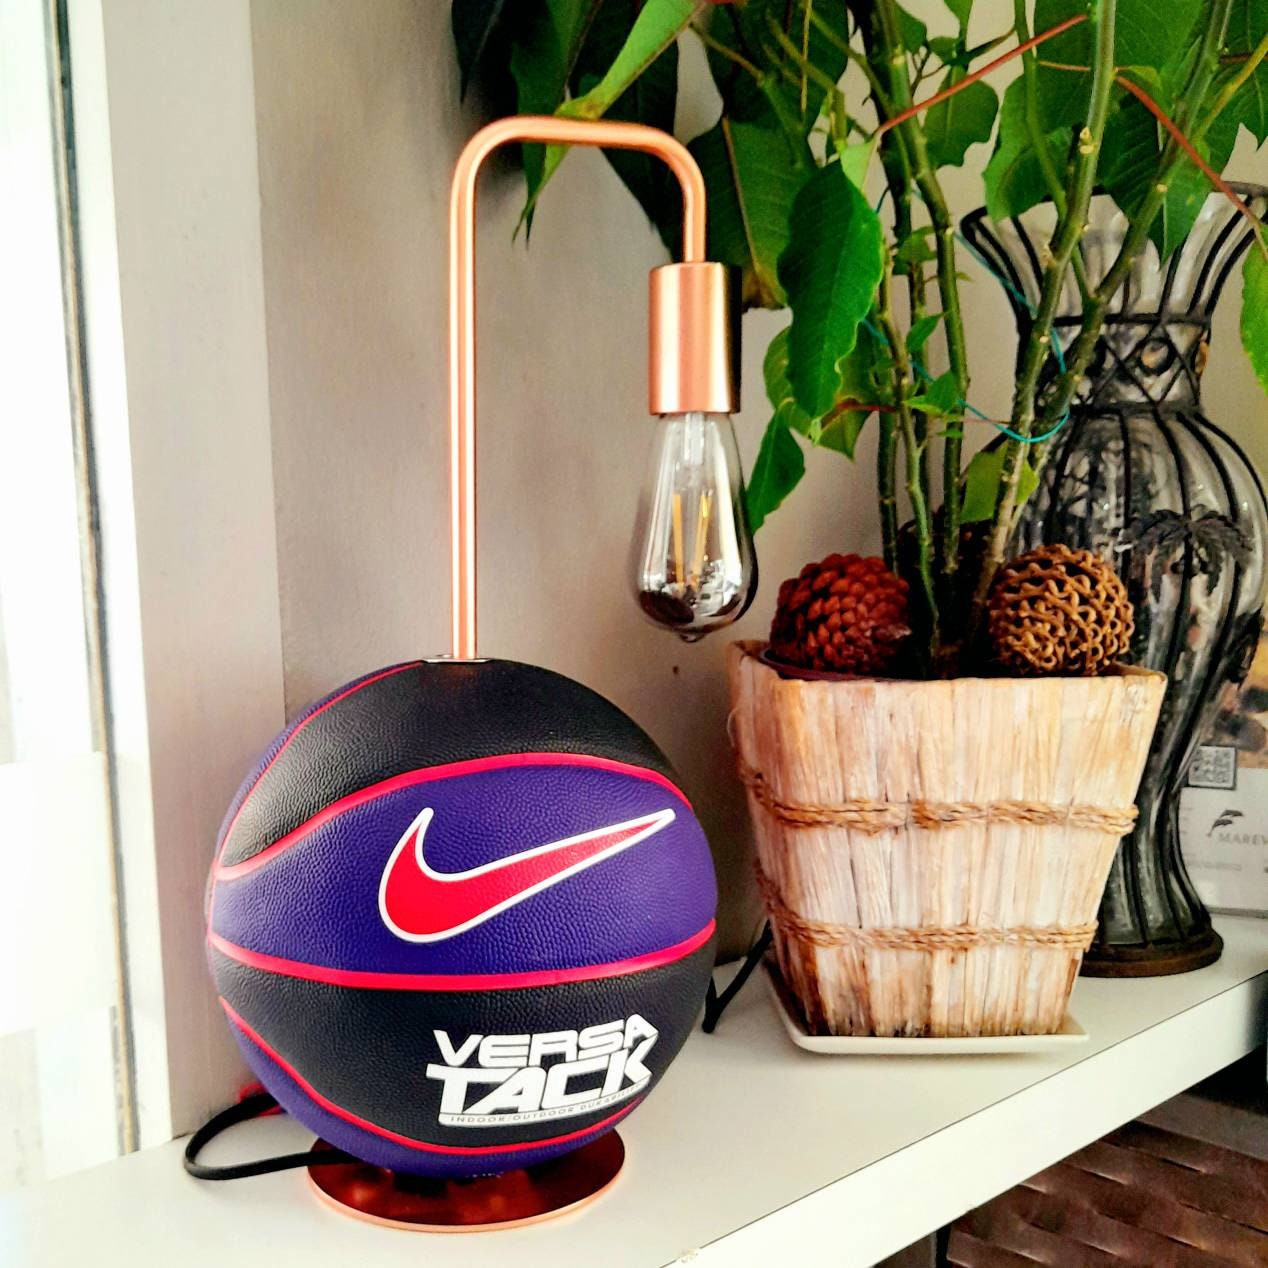 Zilver toxiciteit Matron Nike Versa Tack Basketball Table Lamp Black Red and Purple. - Etsy